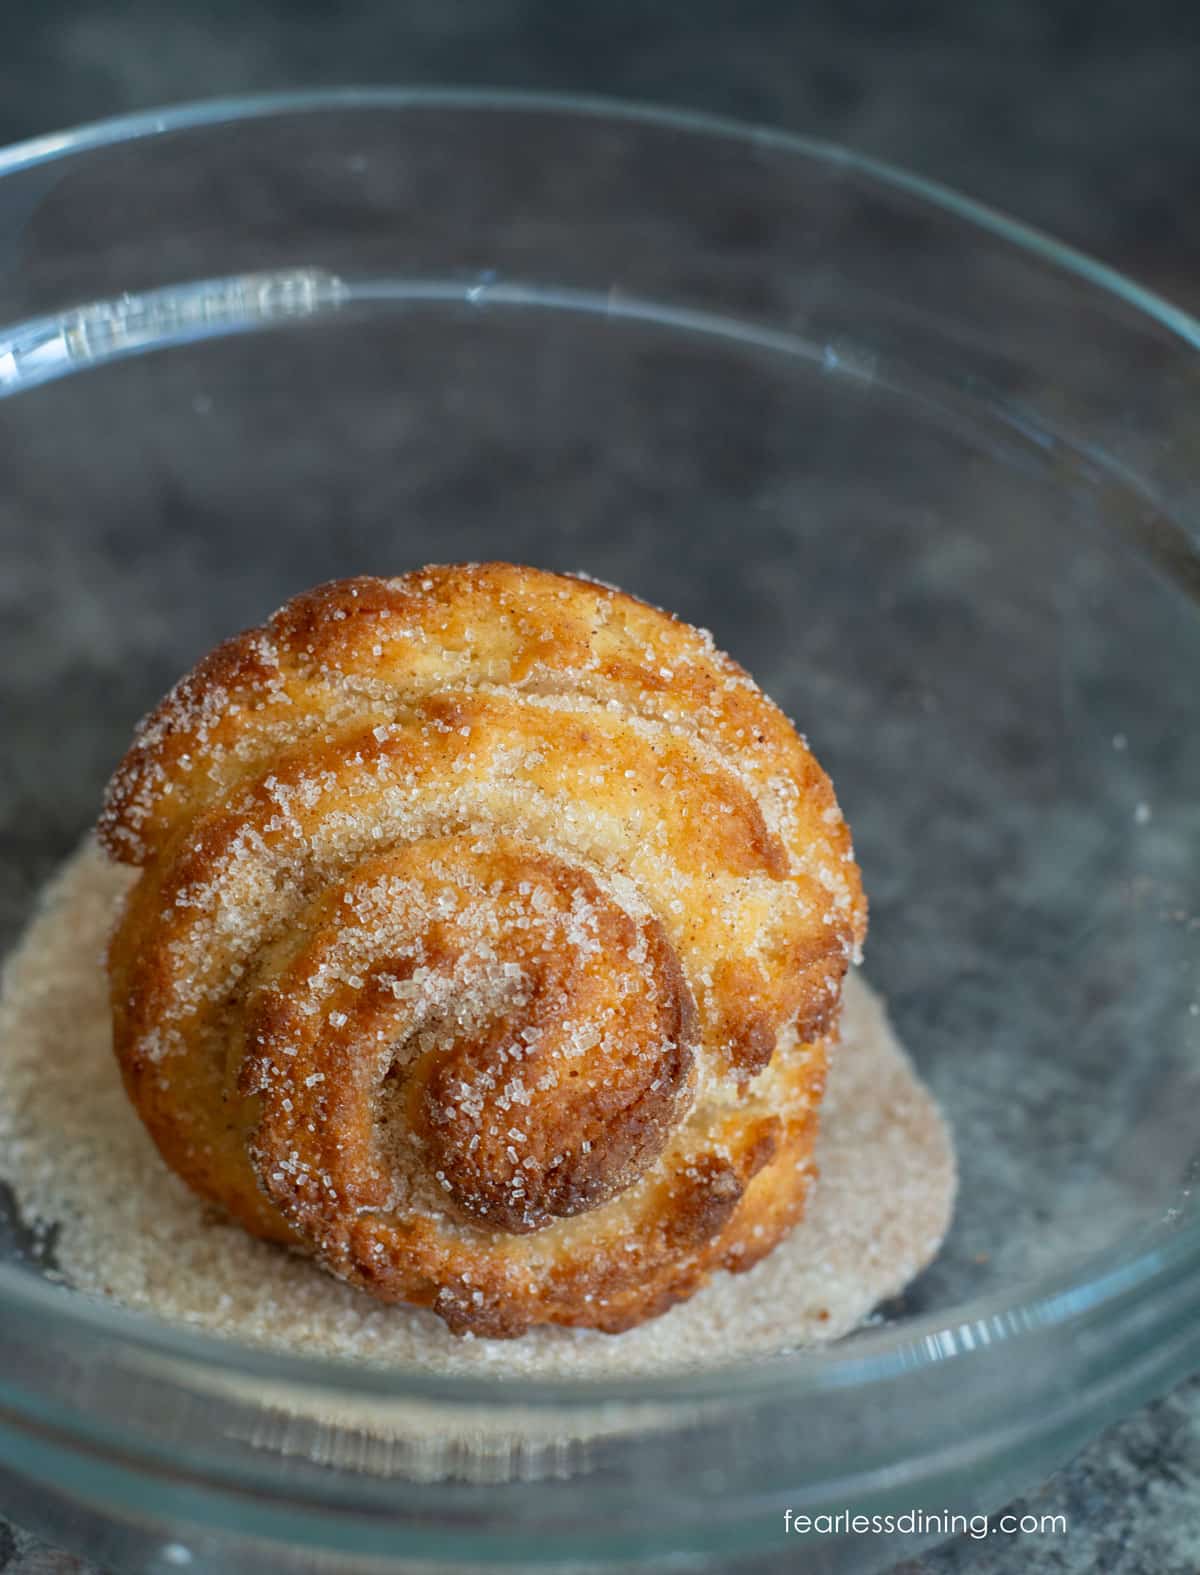 A baked cruffin in a bowl of cinnamon sugar.